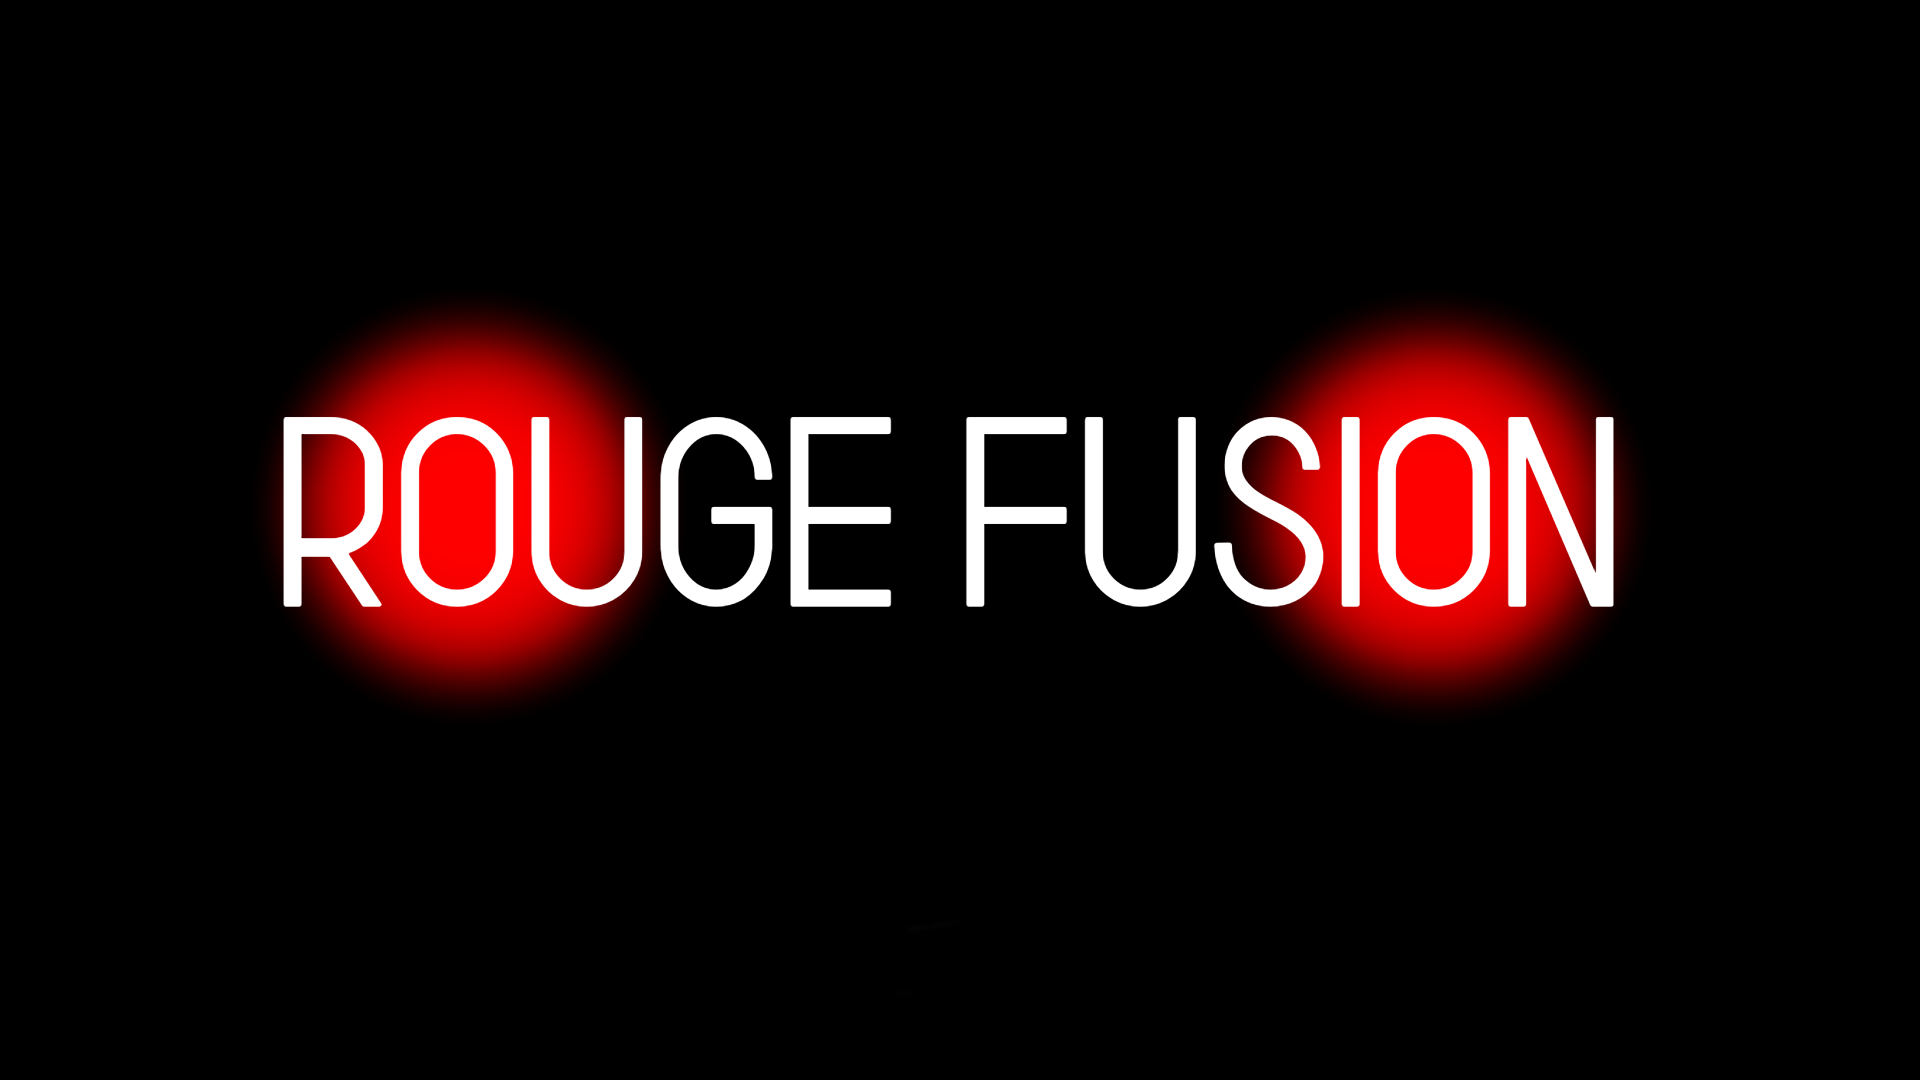 Rouge Fusion